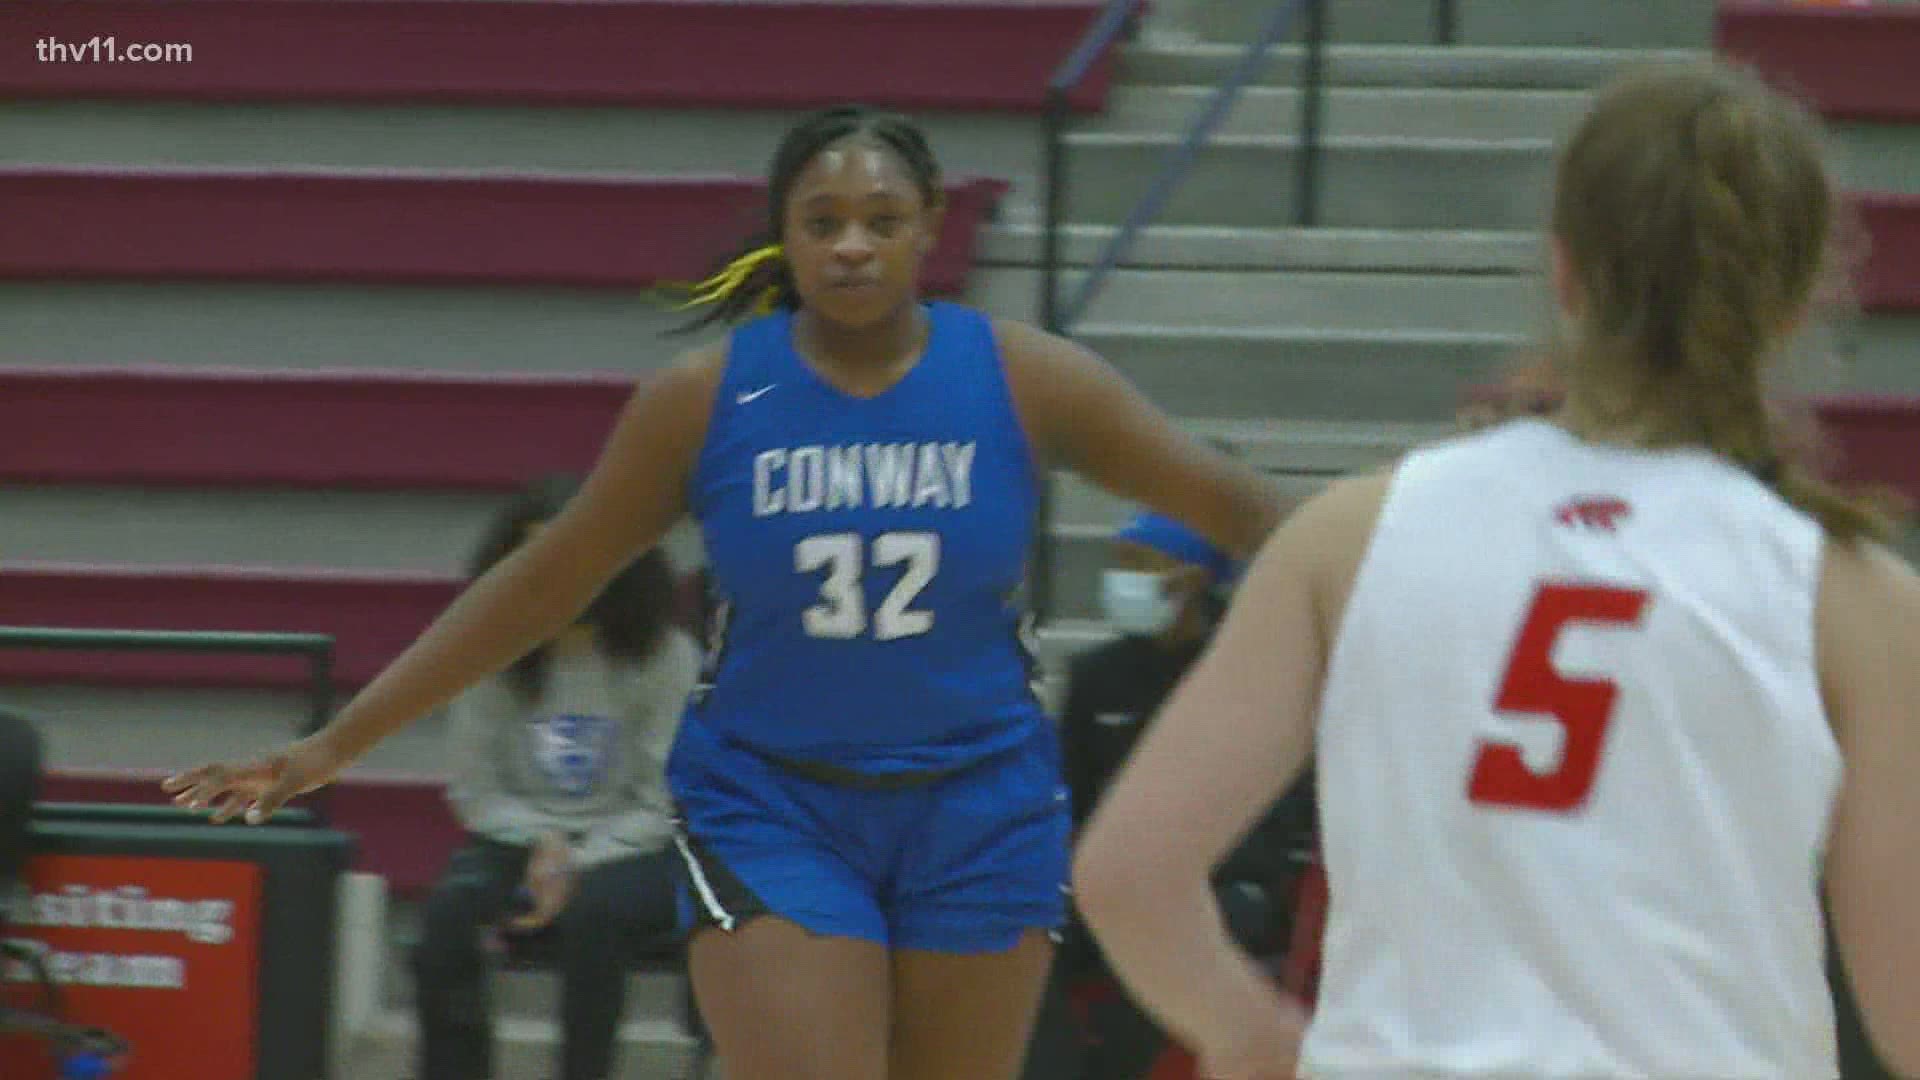 Conway will play the winner of Bryant and Southwest in the quarterfinals of the 6A Central conference tournament on Feb. 23